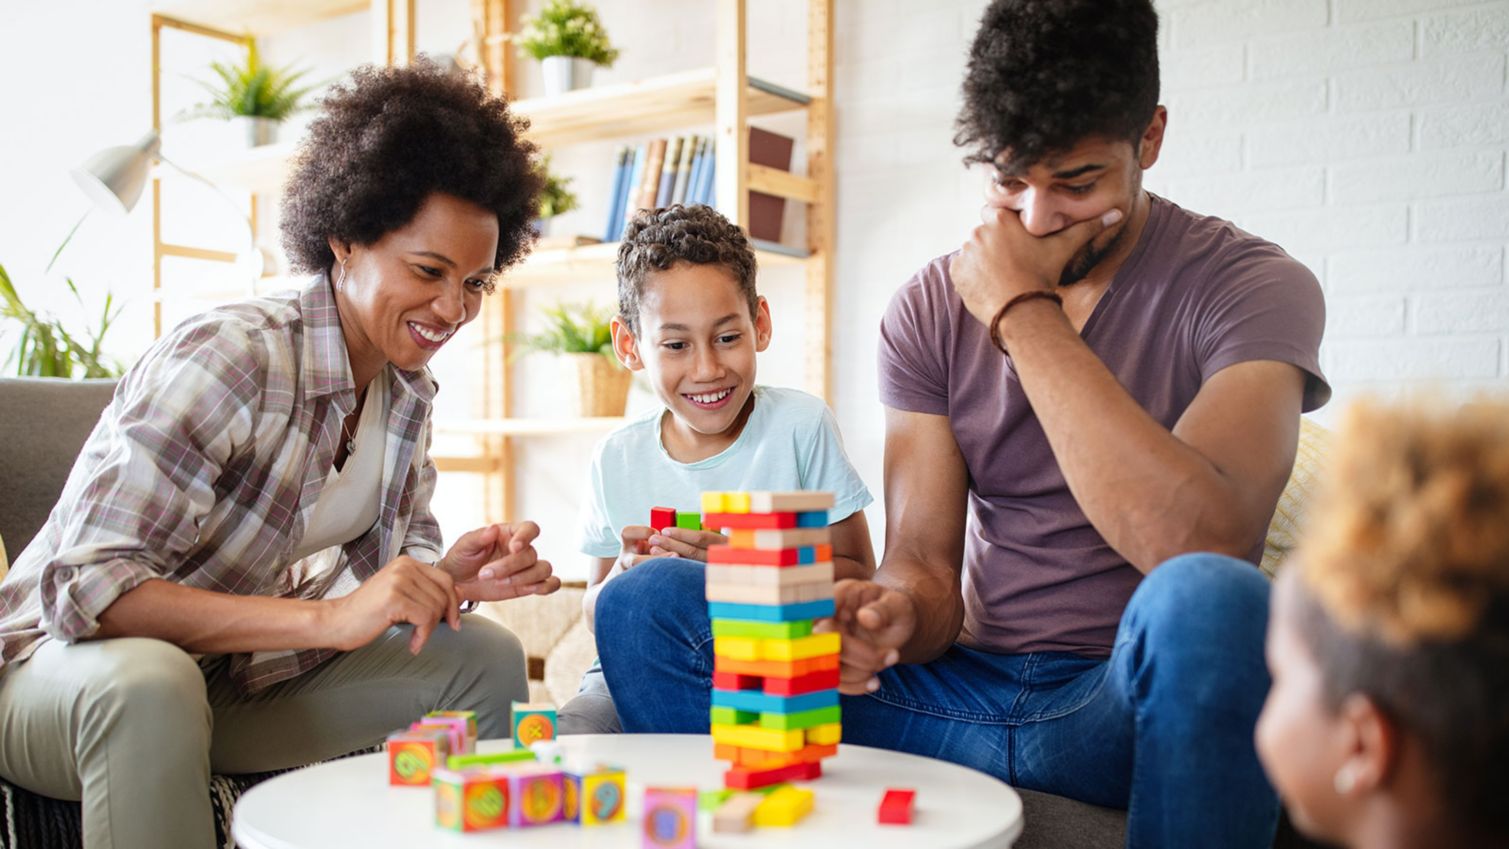 Family with young children plays a board game.